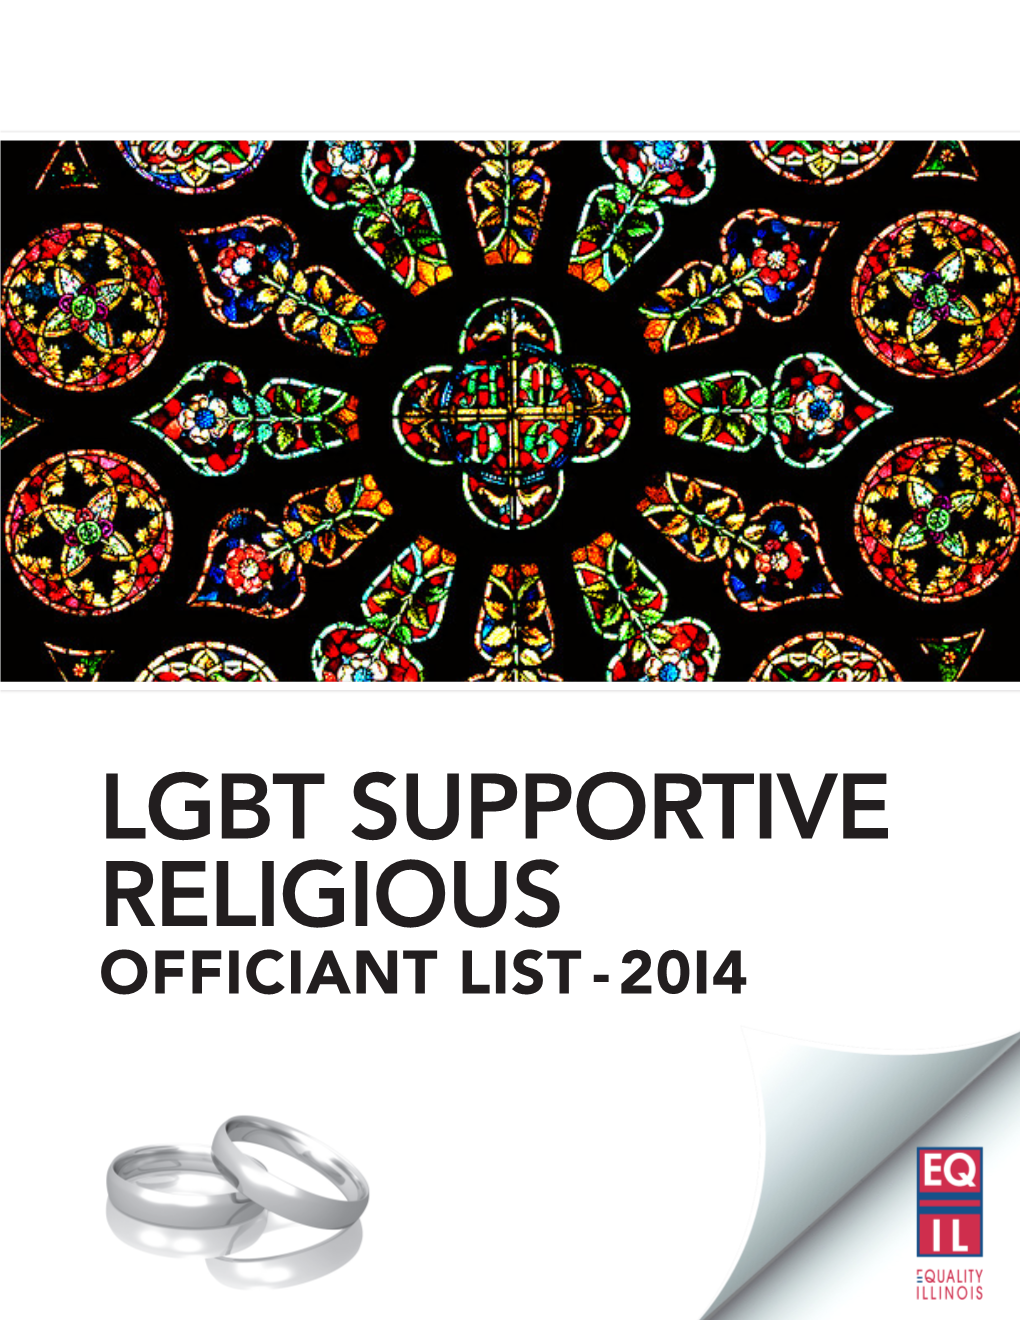 LGBT Supportive Religious Marriage Officiants